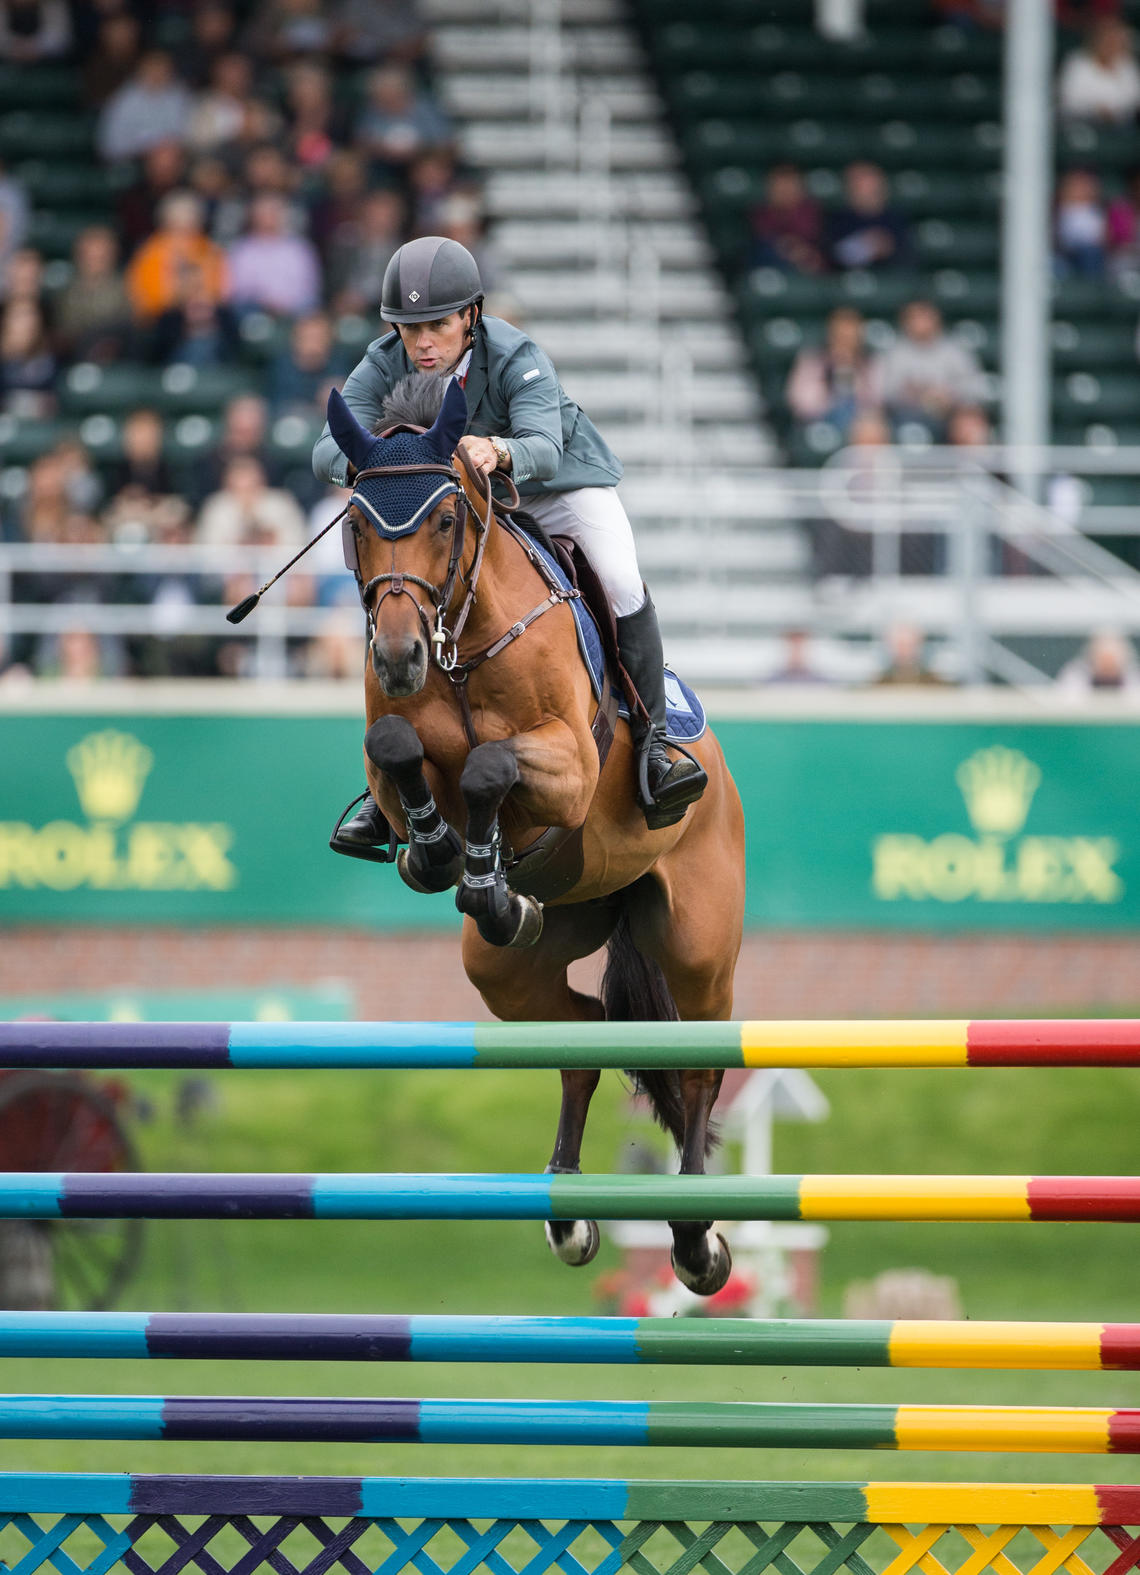 Horse jumping over a competition fence